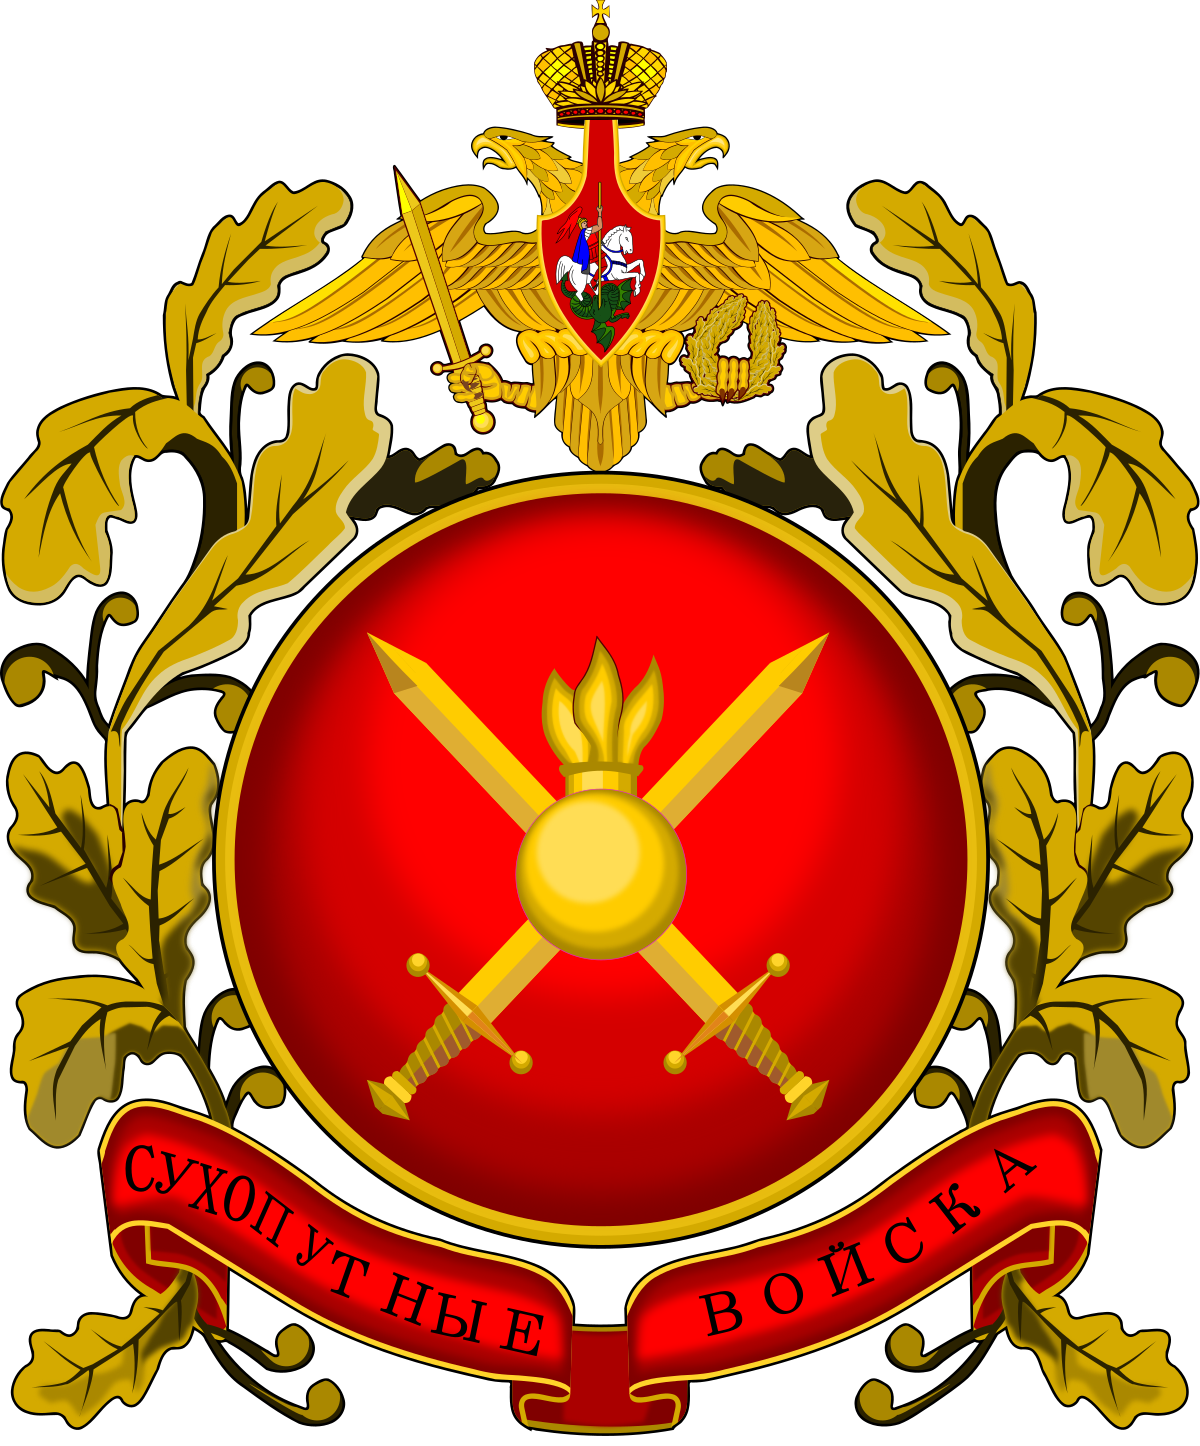 Russian Ground Forces Wikipedia - badge id script and badge id value roblox